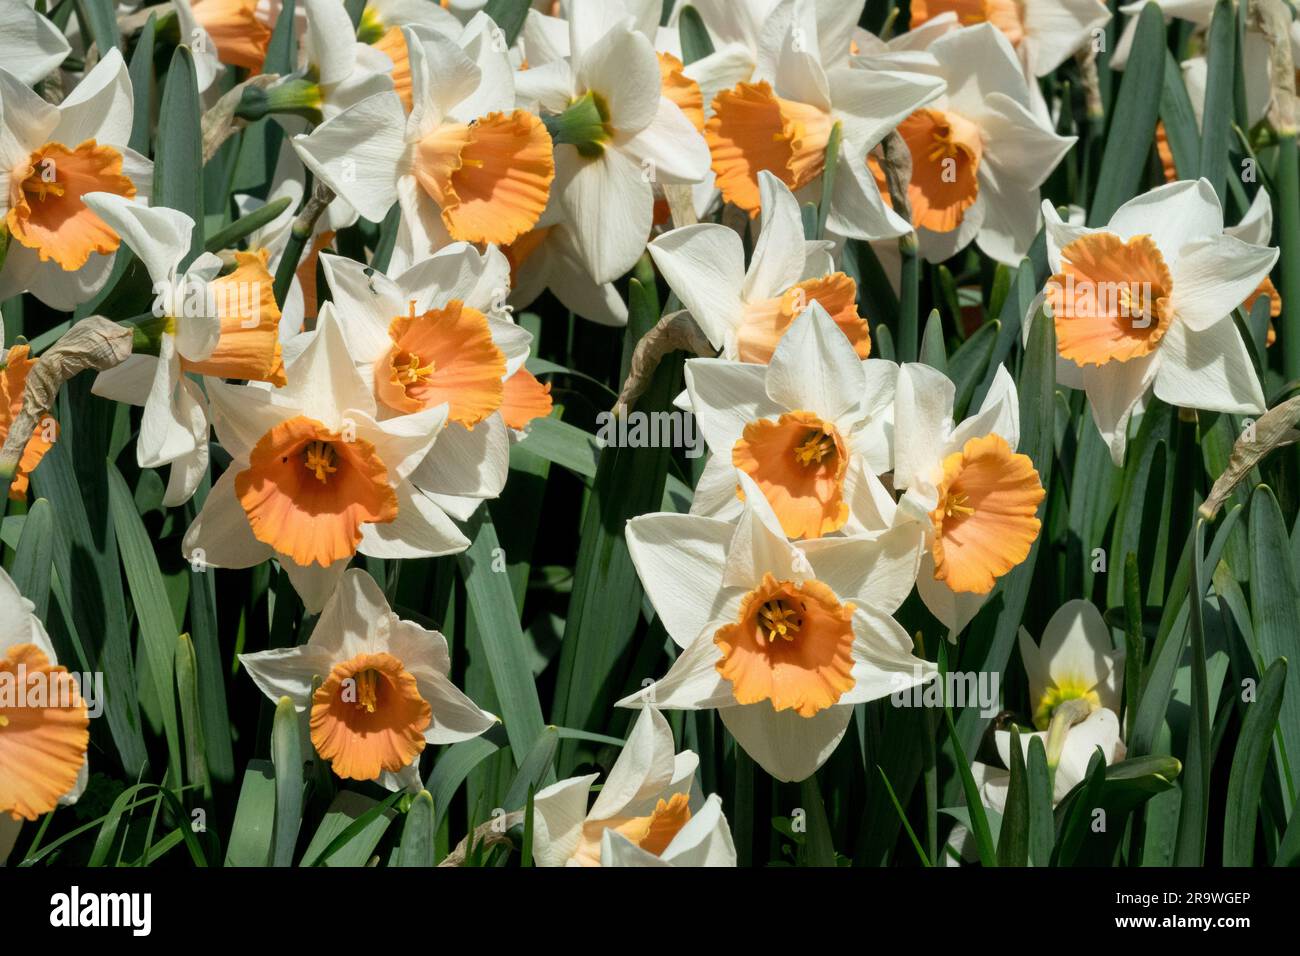 Narcissus Accent, Daffodils, Garden, Flowers, Spring, Narcissus Daffodils, Large-cupped, Plant, Orange Center Stock Photo